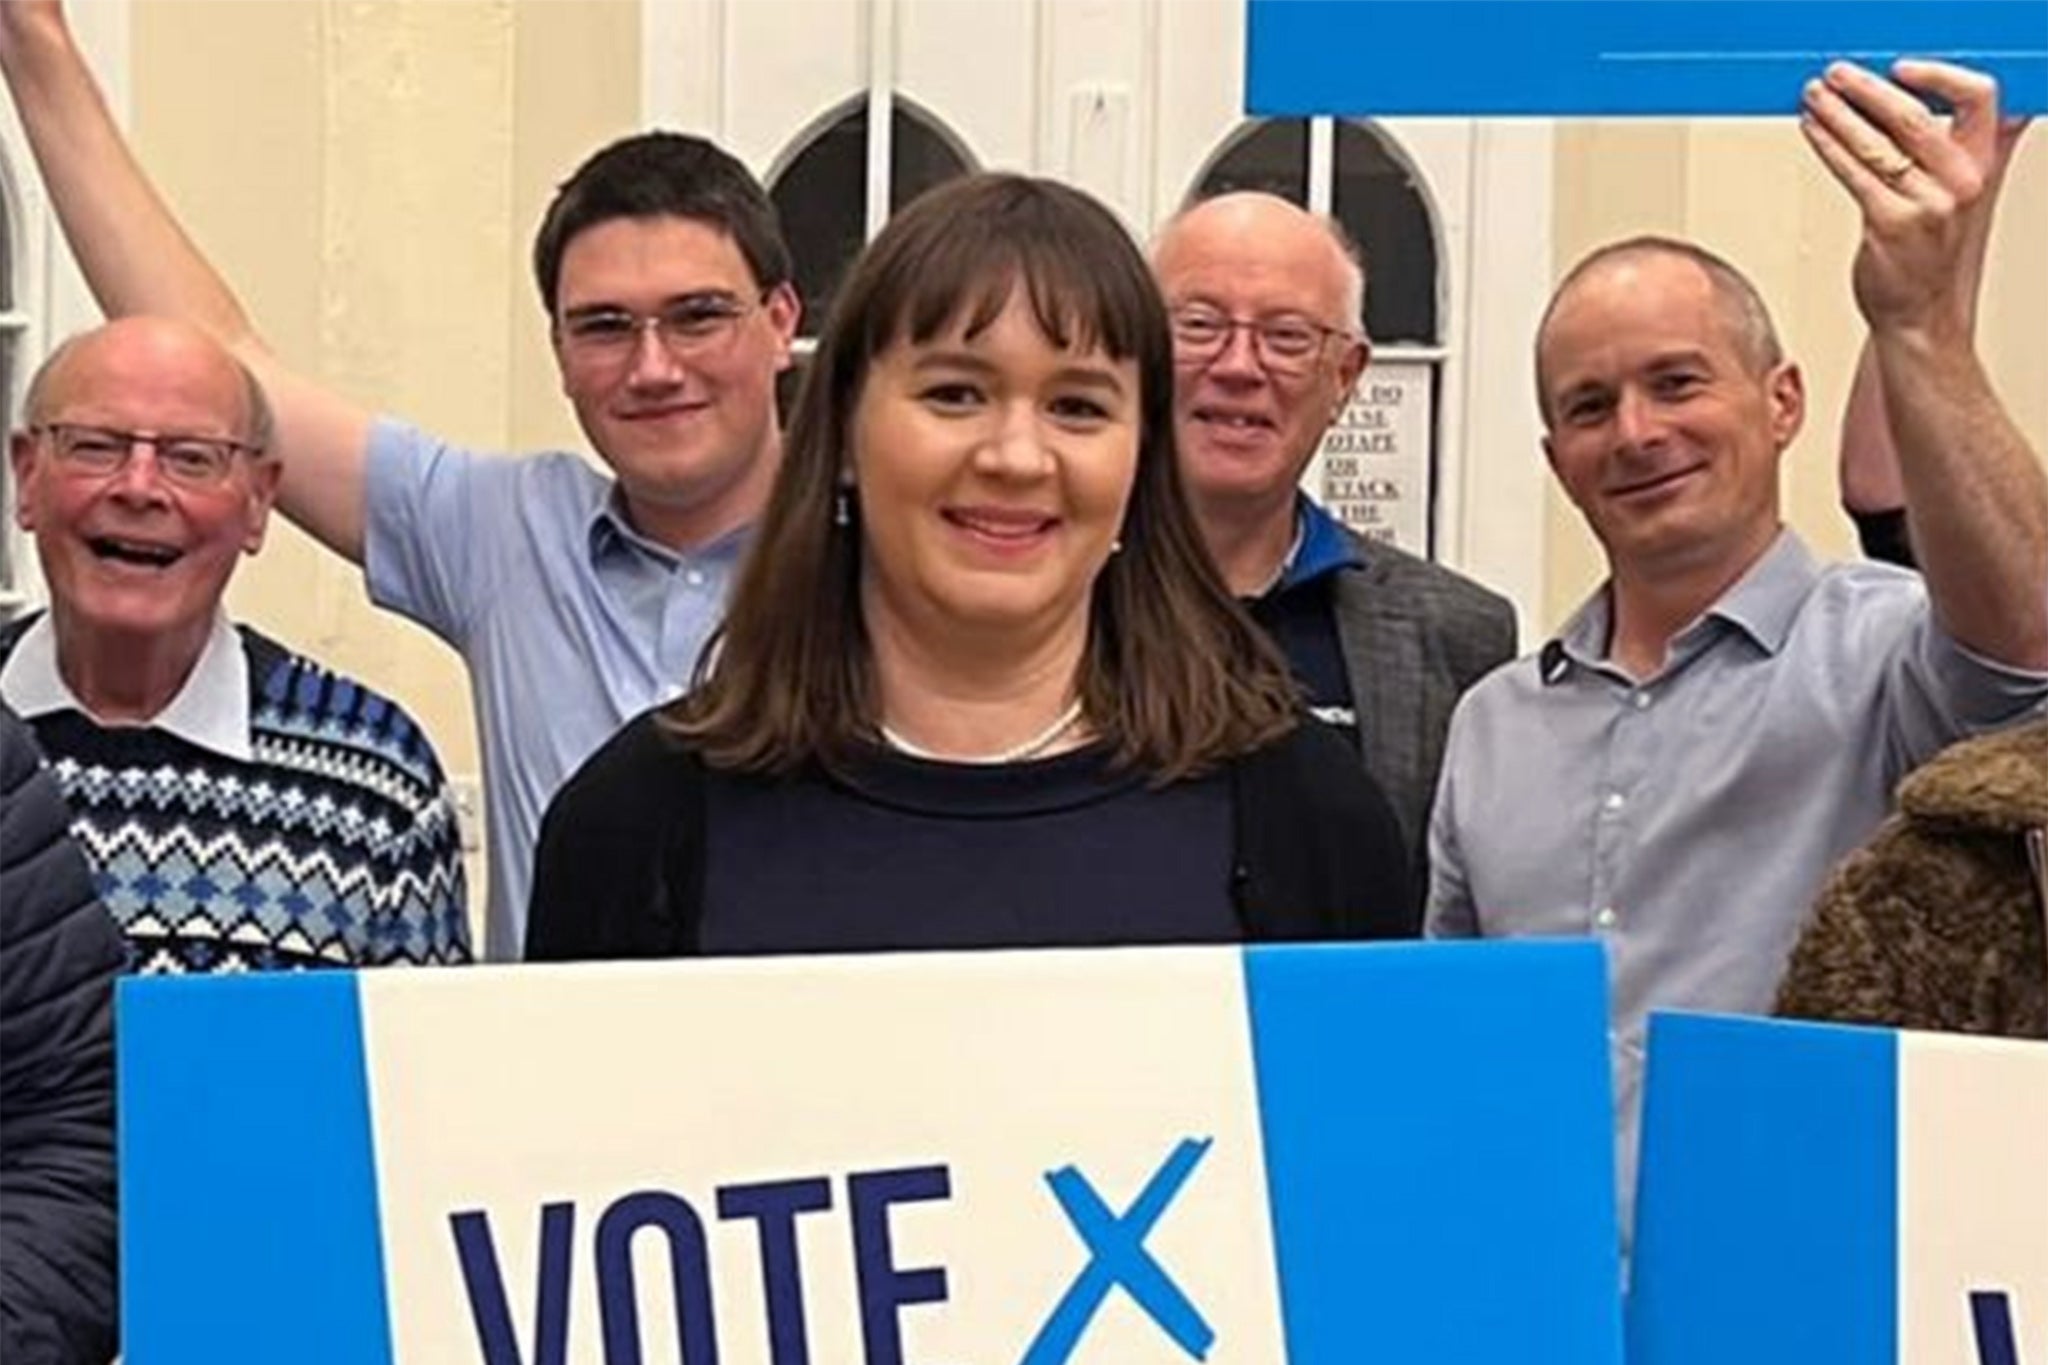 Bristol North West candidate Laura Saunders previously worked at Conservative Campaign HQ